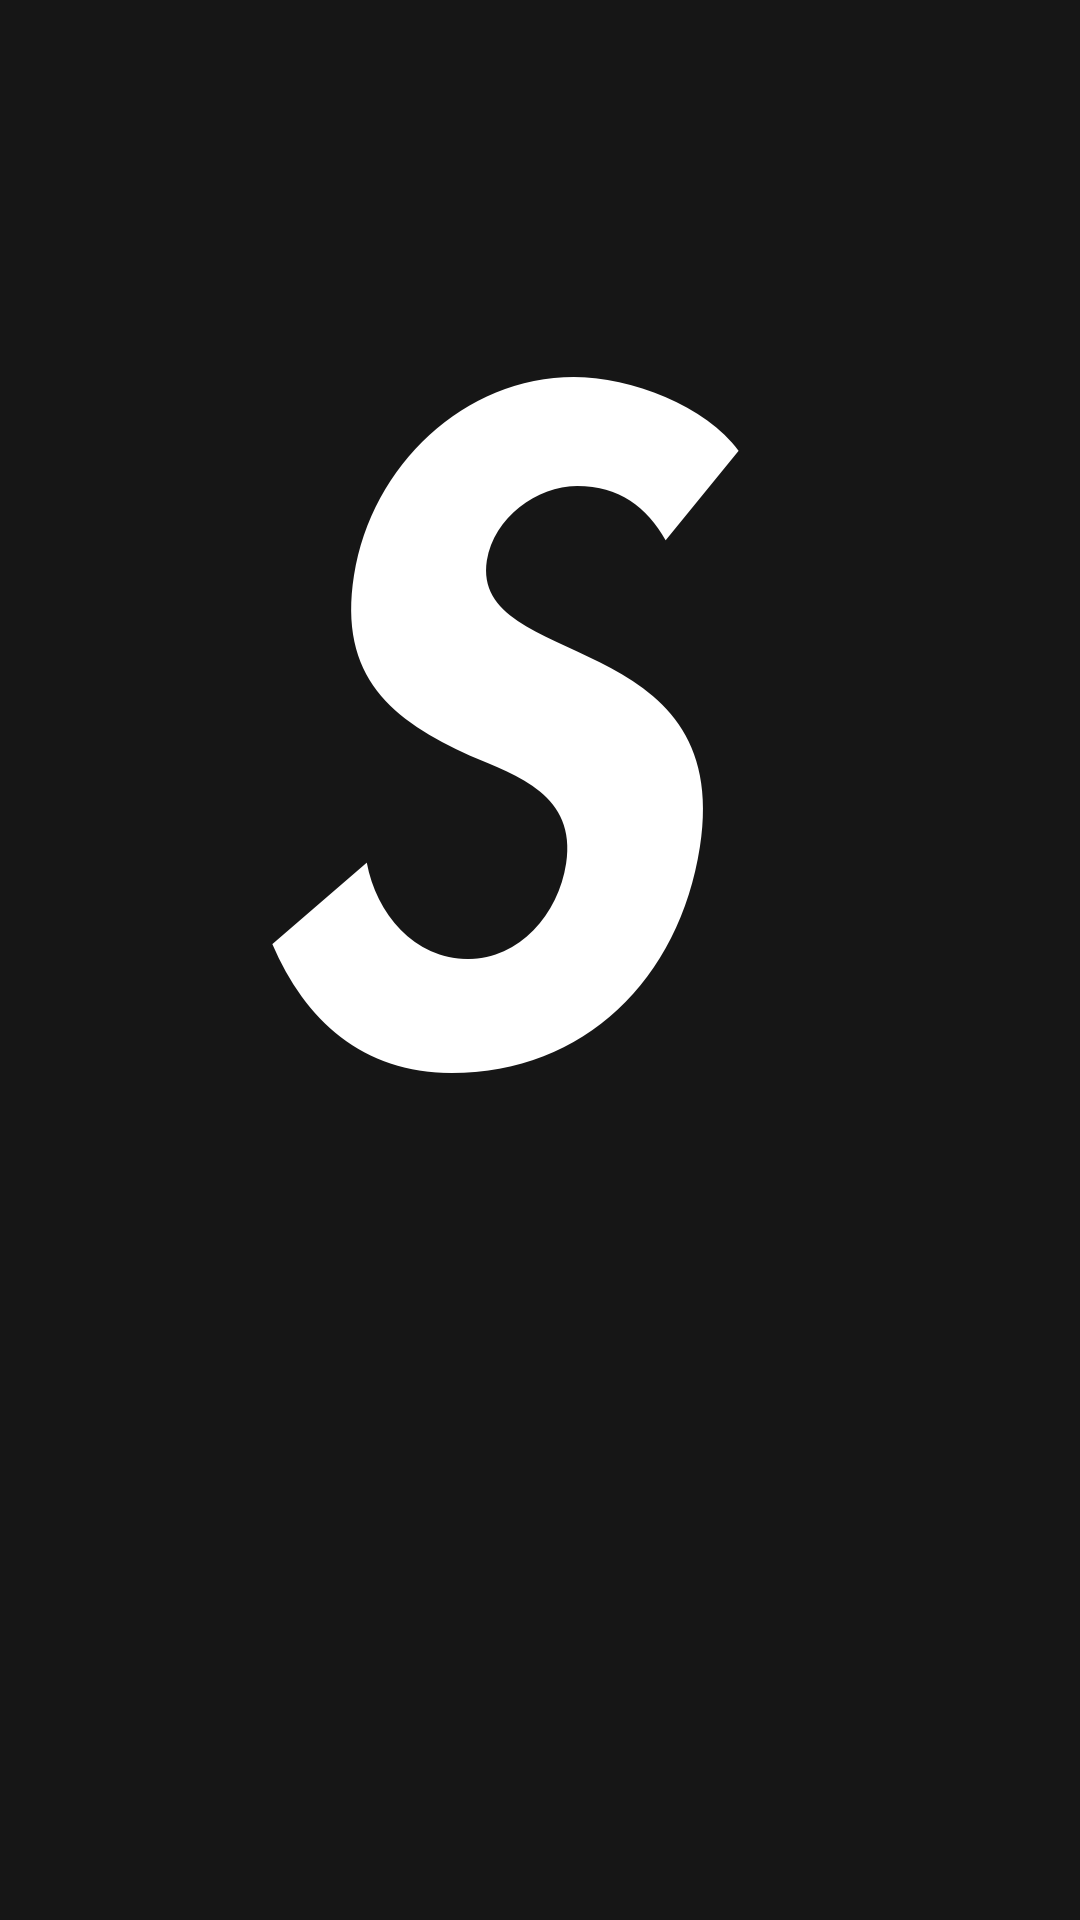 Stylish S Letter Wallpapers Backgrounds 32 pictures